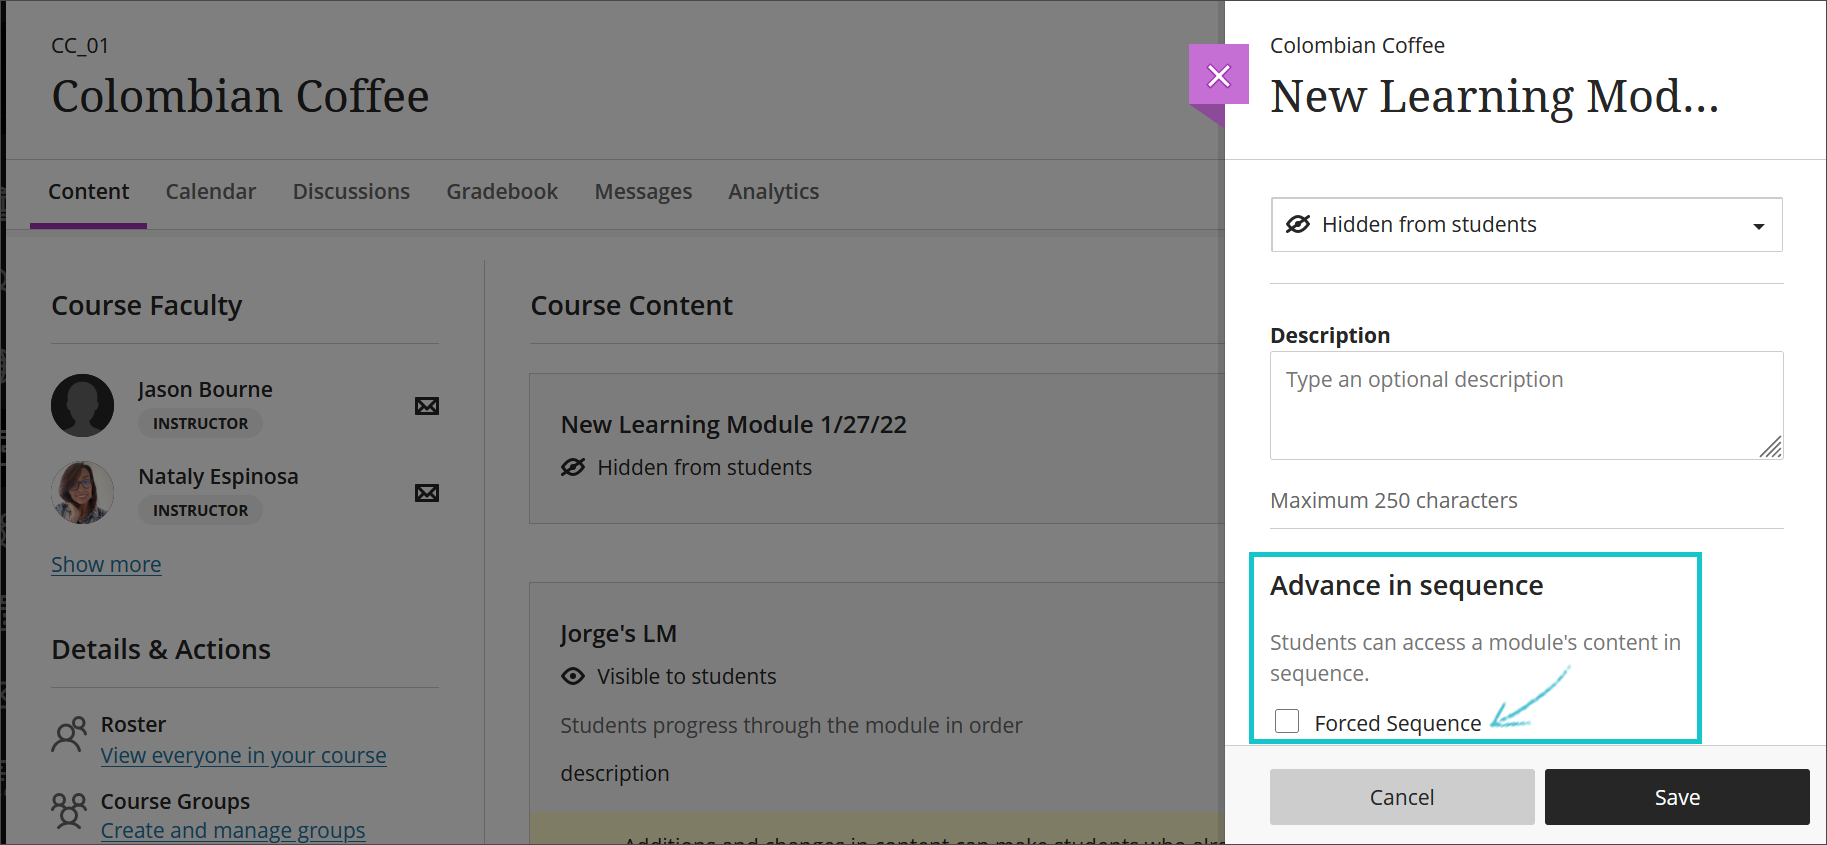 learning module settings now appear in a peek panel to the right